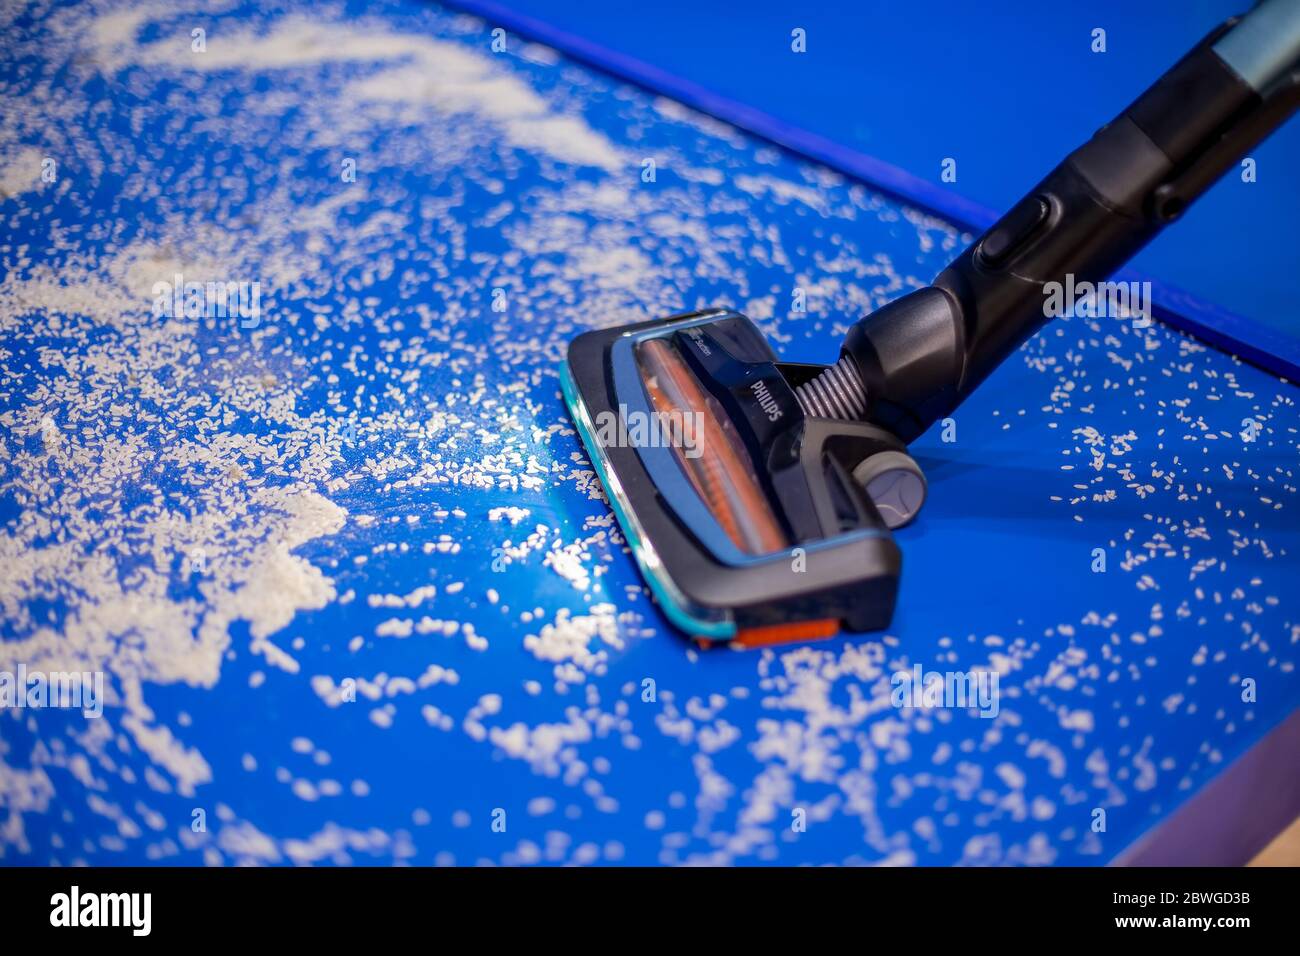 Moscow, Russia - October 04, 2019: a new vacuum cleaner philips SpeedPro  aqua with wet cleaning and LEDs cleans the blue floor from white crumbs  Stock Photo - Alamy